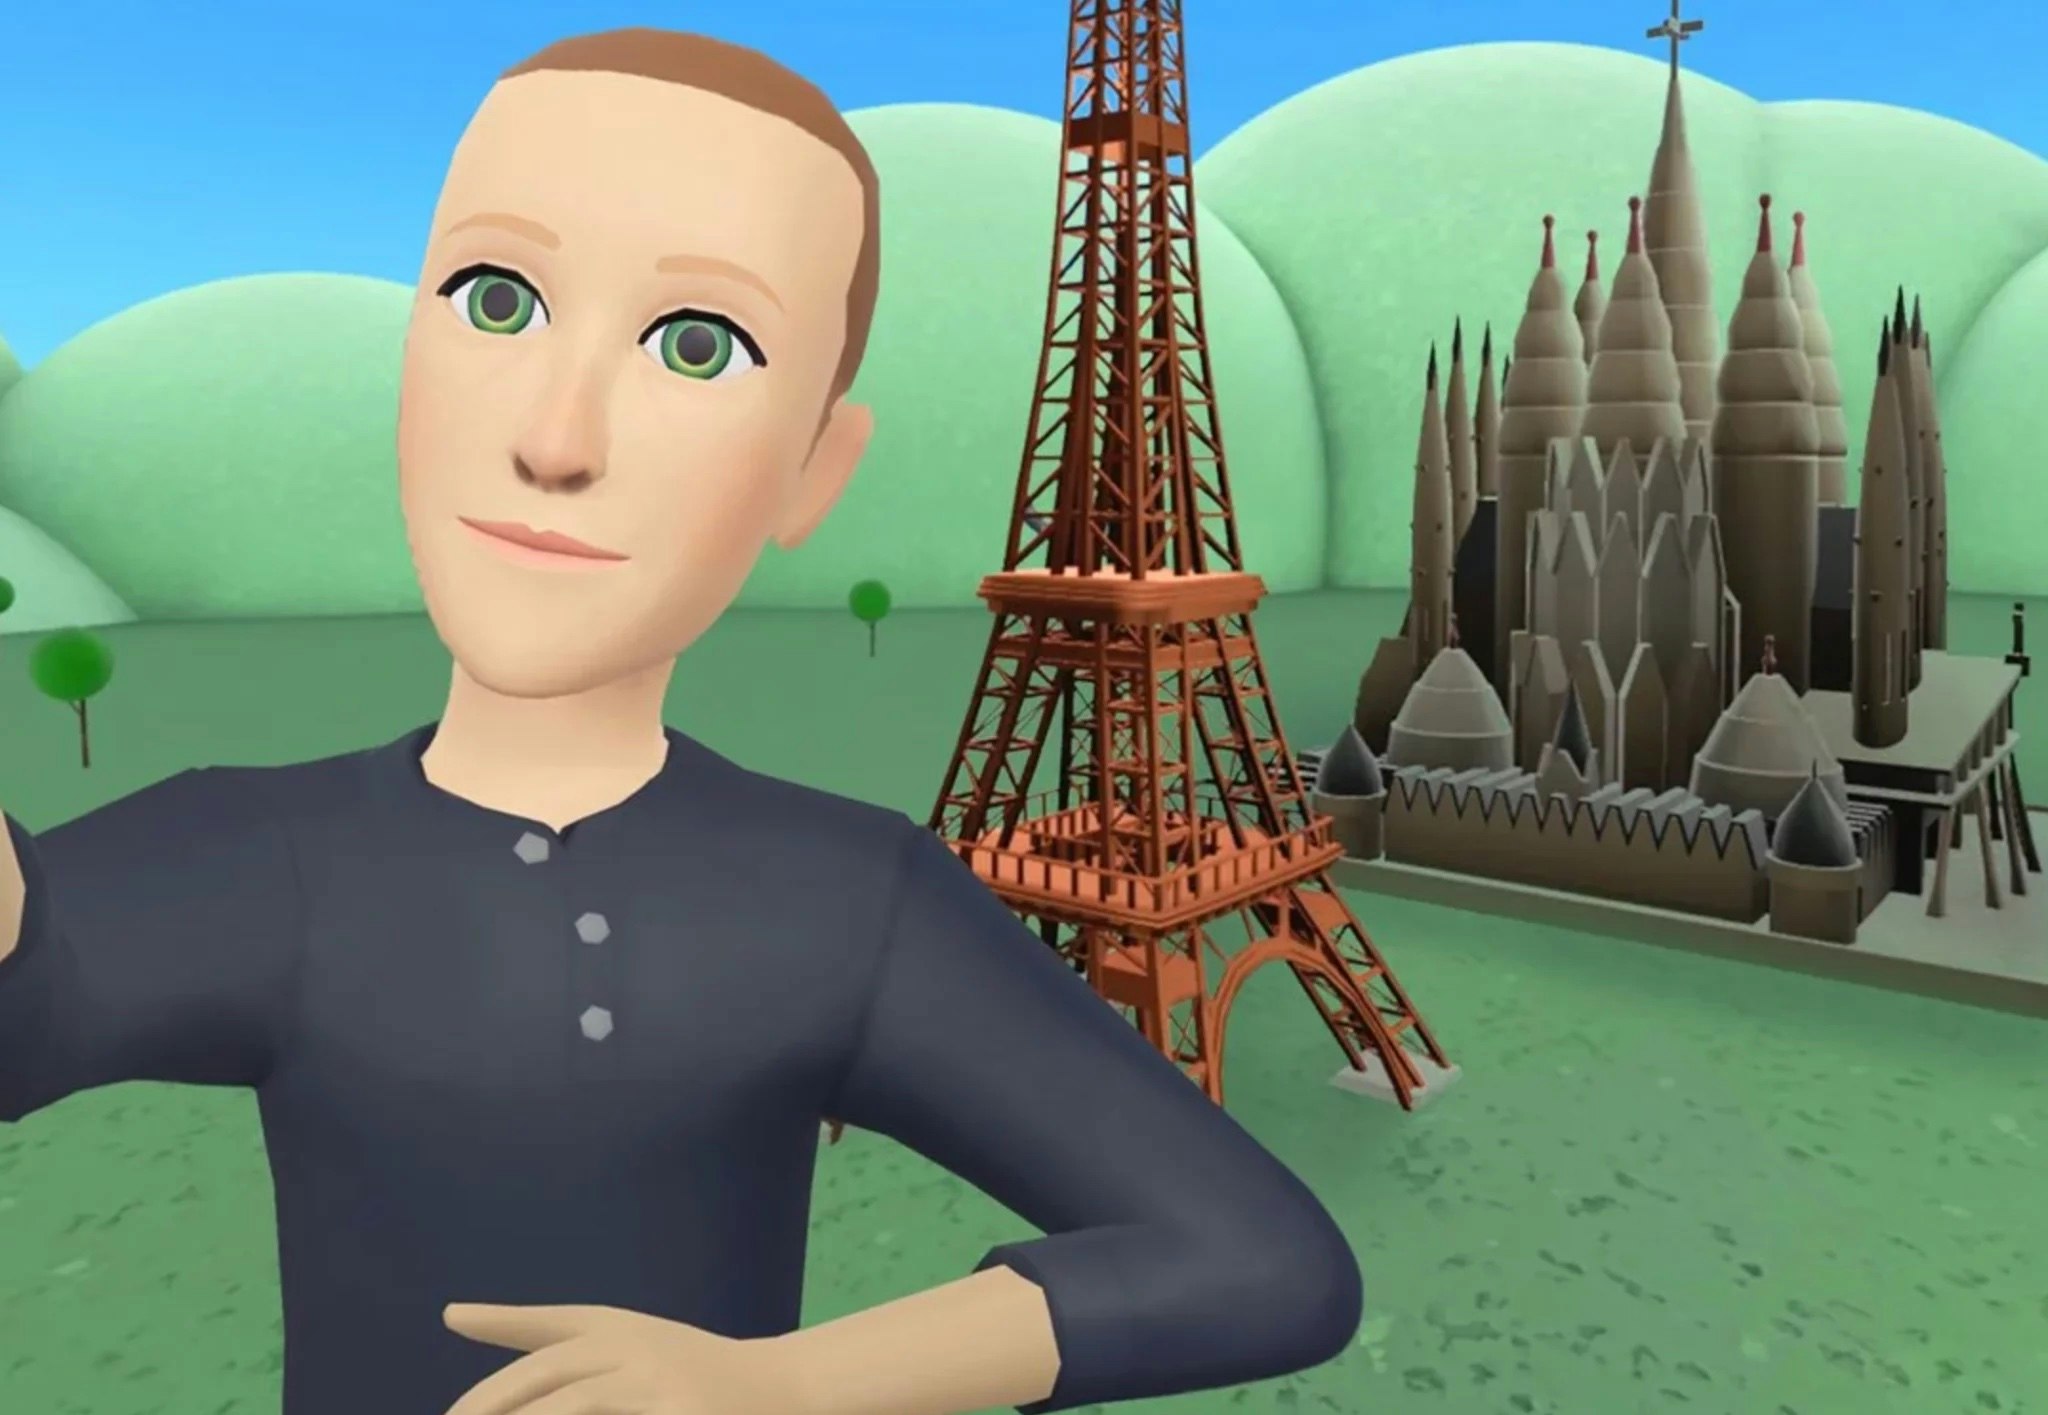 Mark Zuckerberg's metaverse selfie in front of poorly rendered versions of the Eiffel Tower and the Sagrada Familia